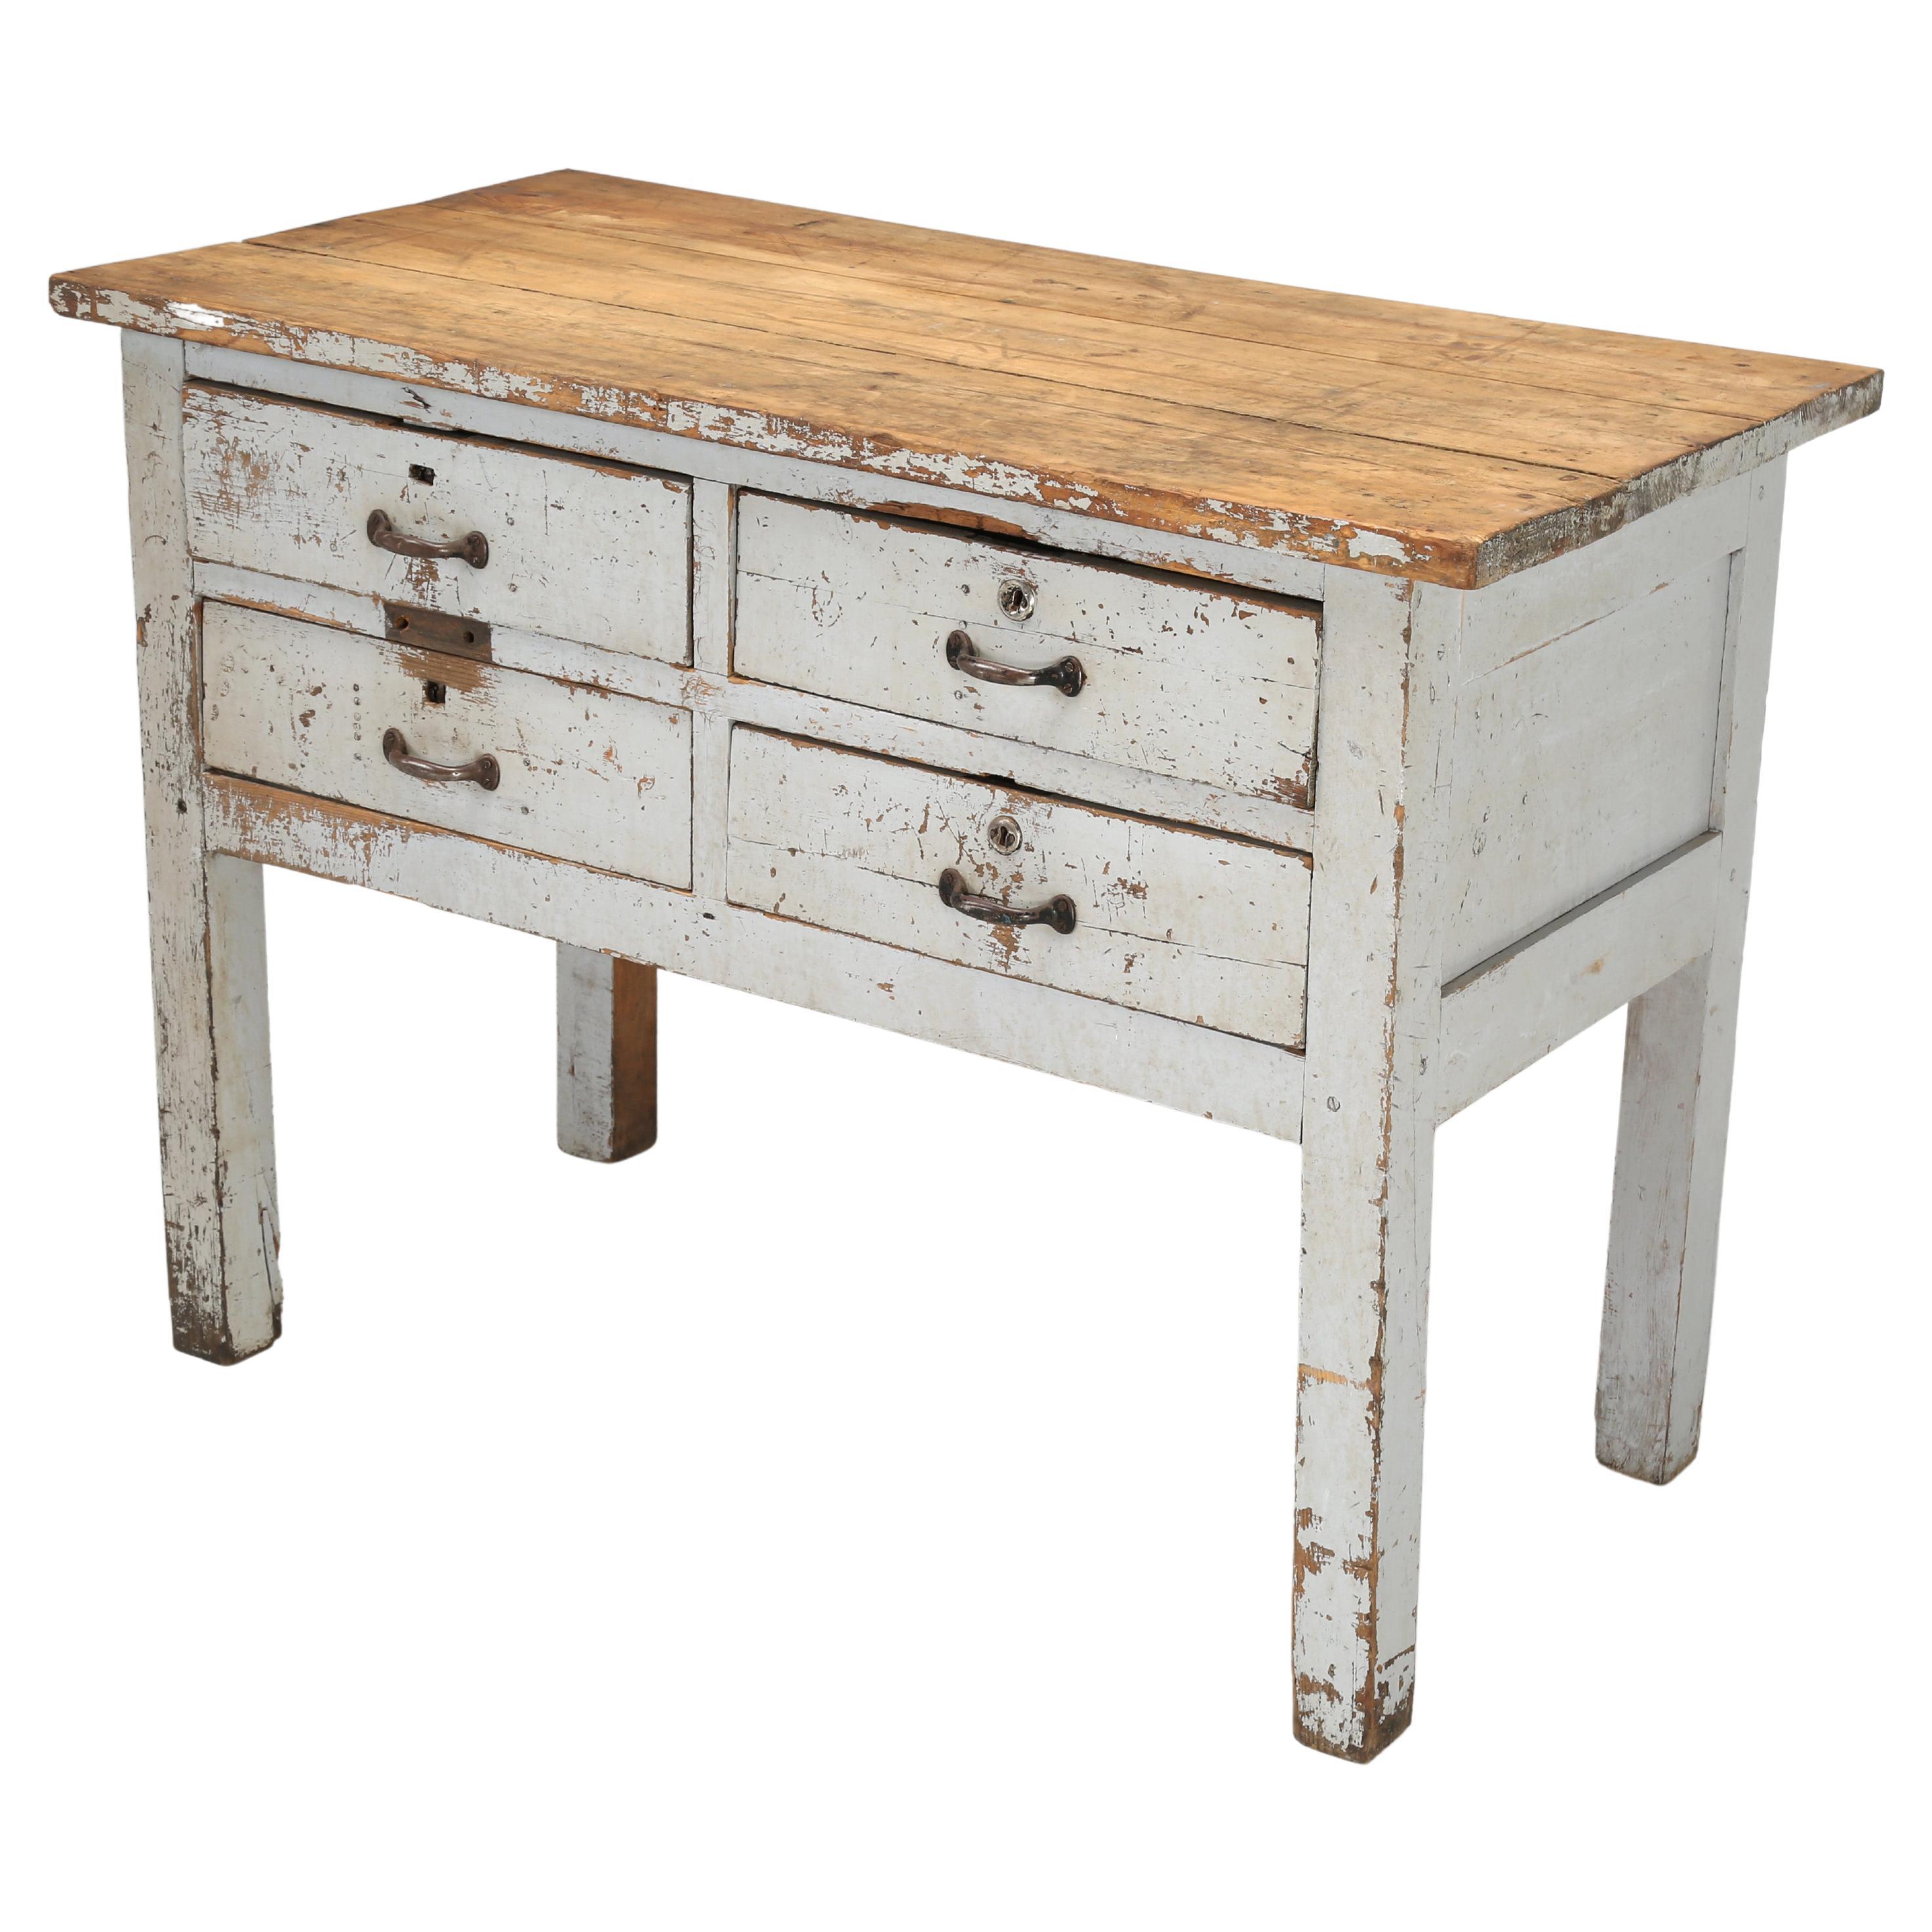 Antique Industrial Shop Table Begging to Become a Kitchen Island Original Paint For Sale